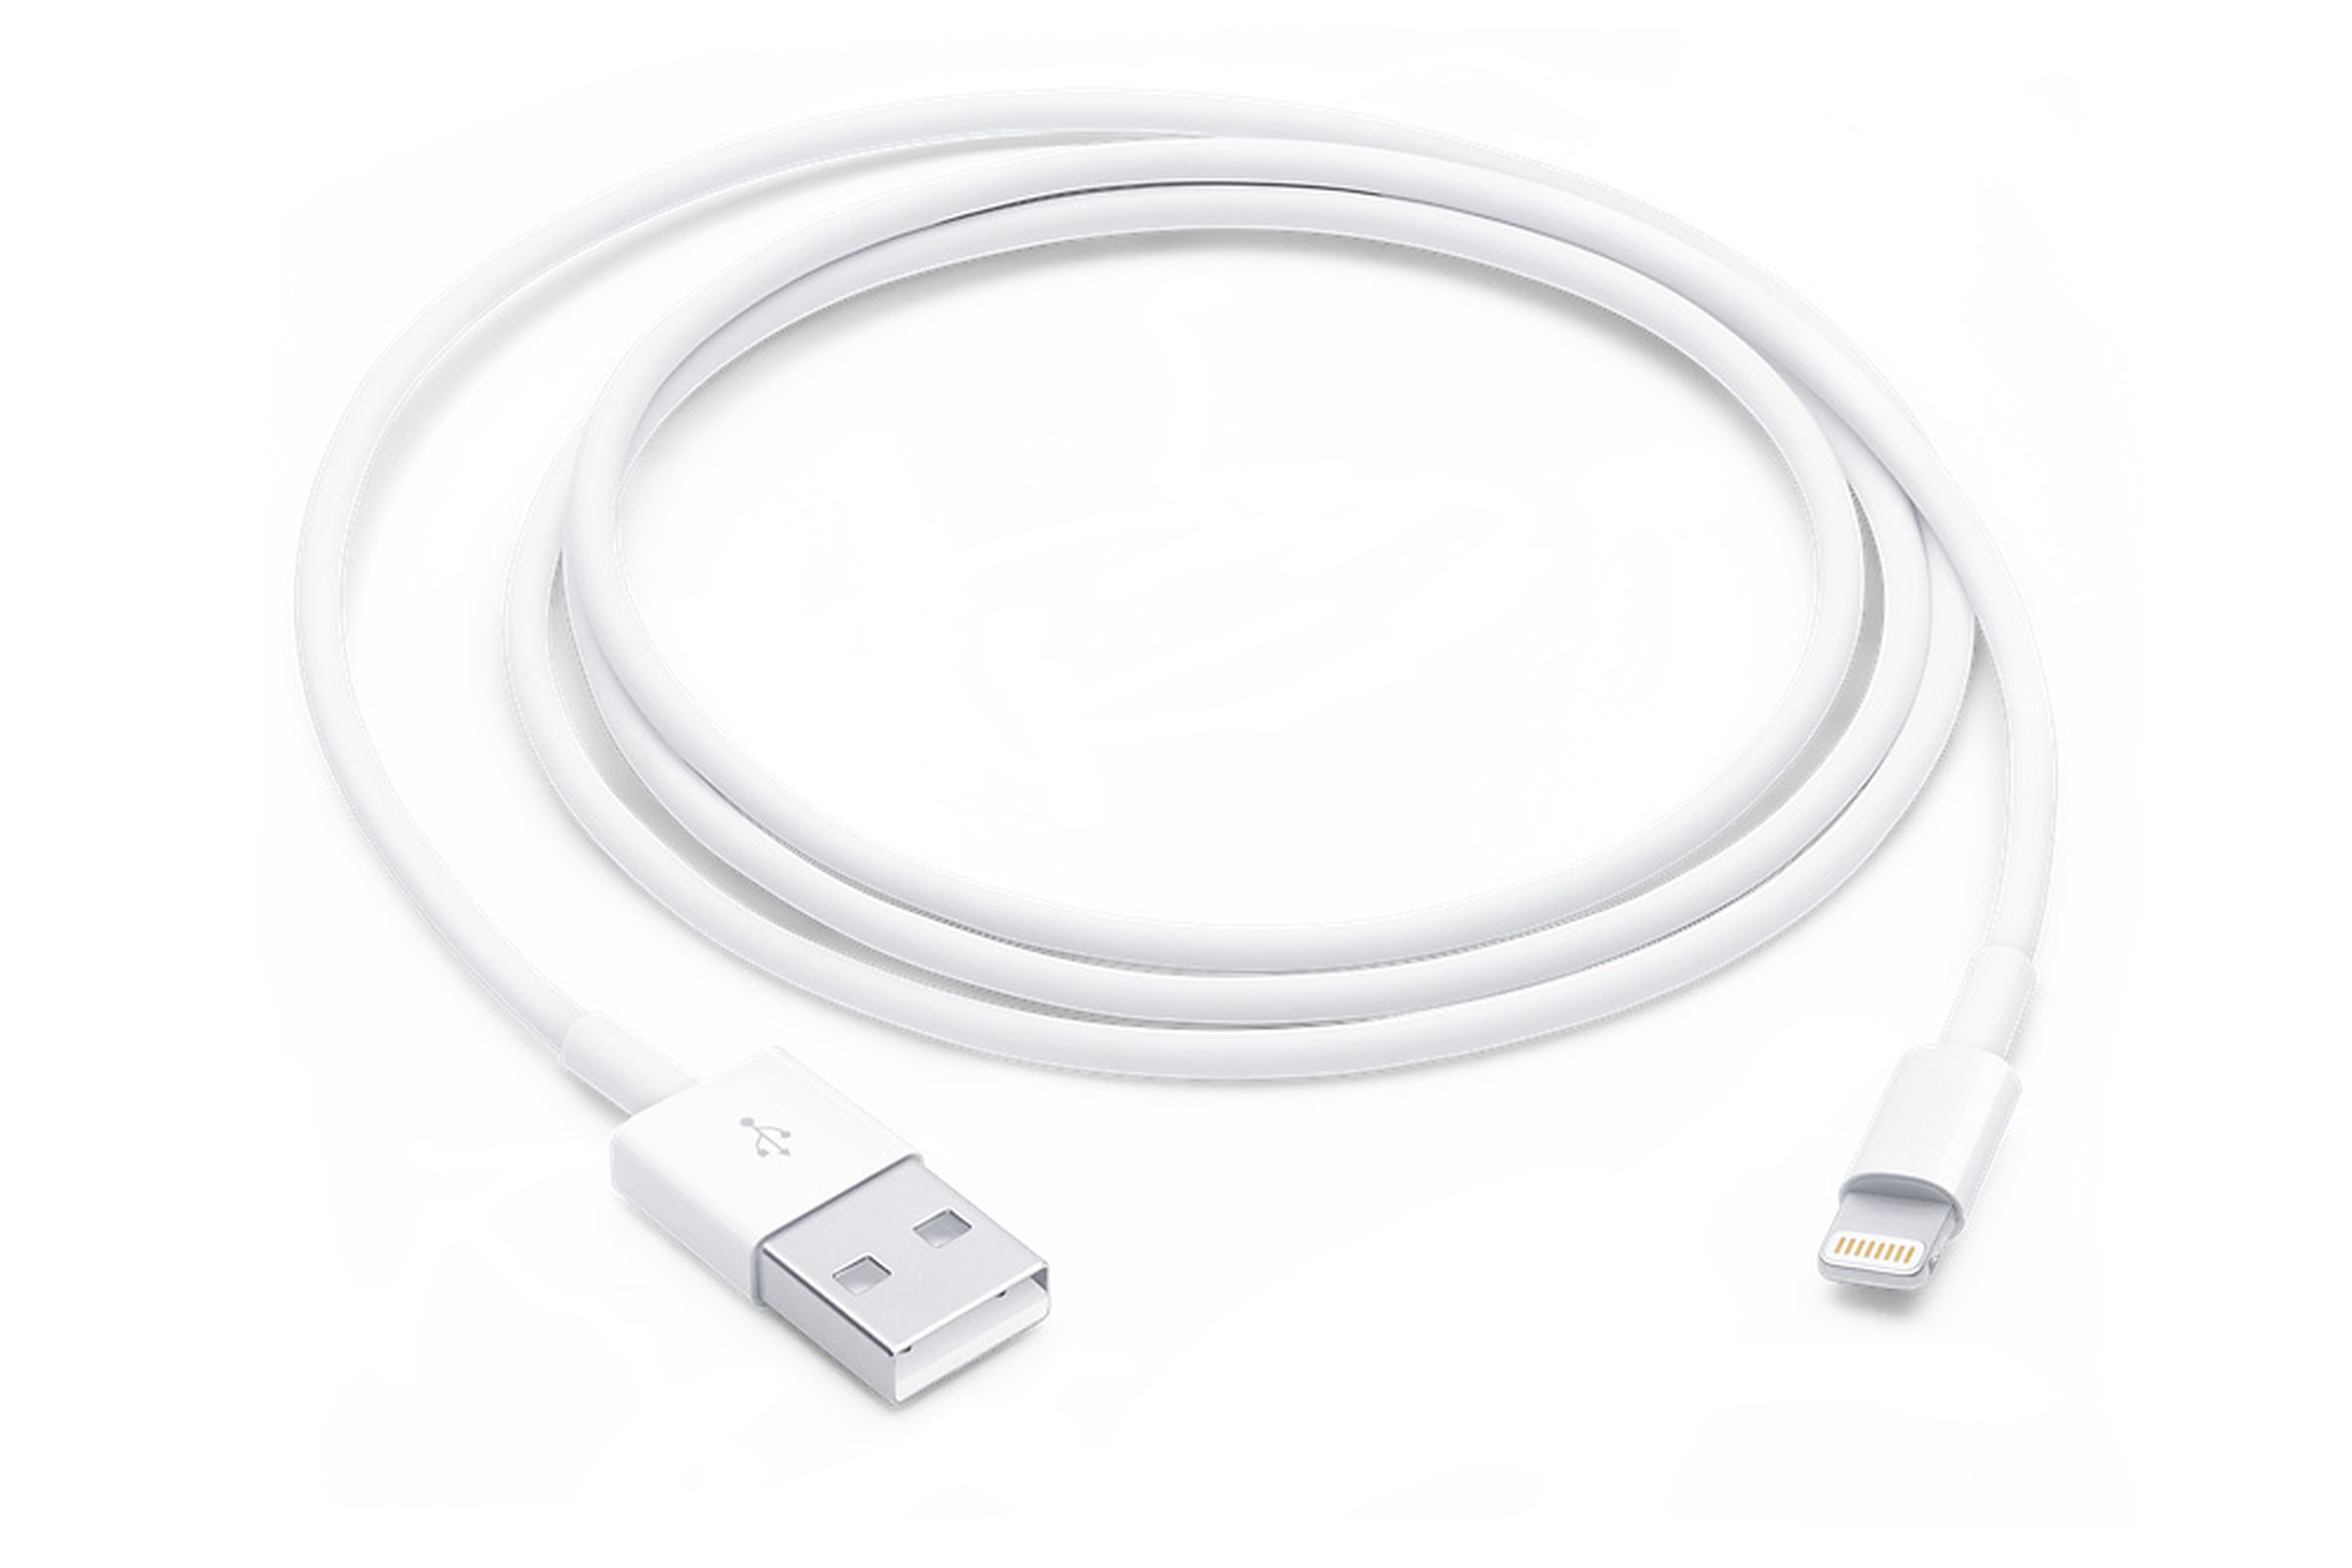 A Lightning to USB-A cable.